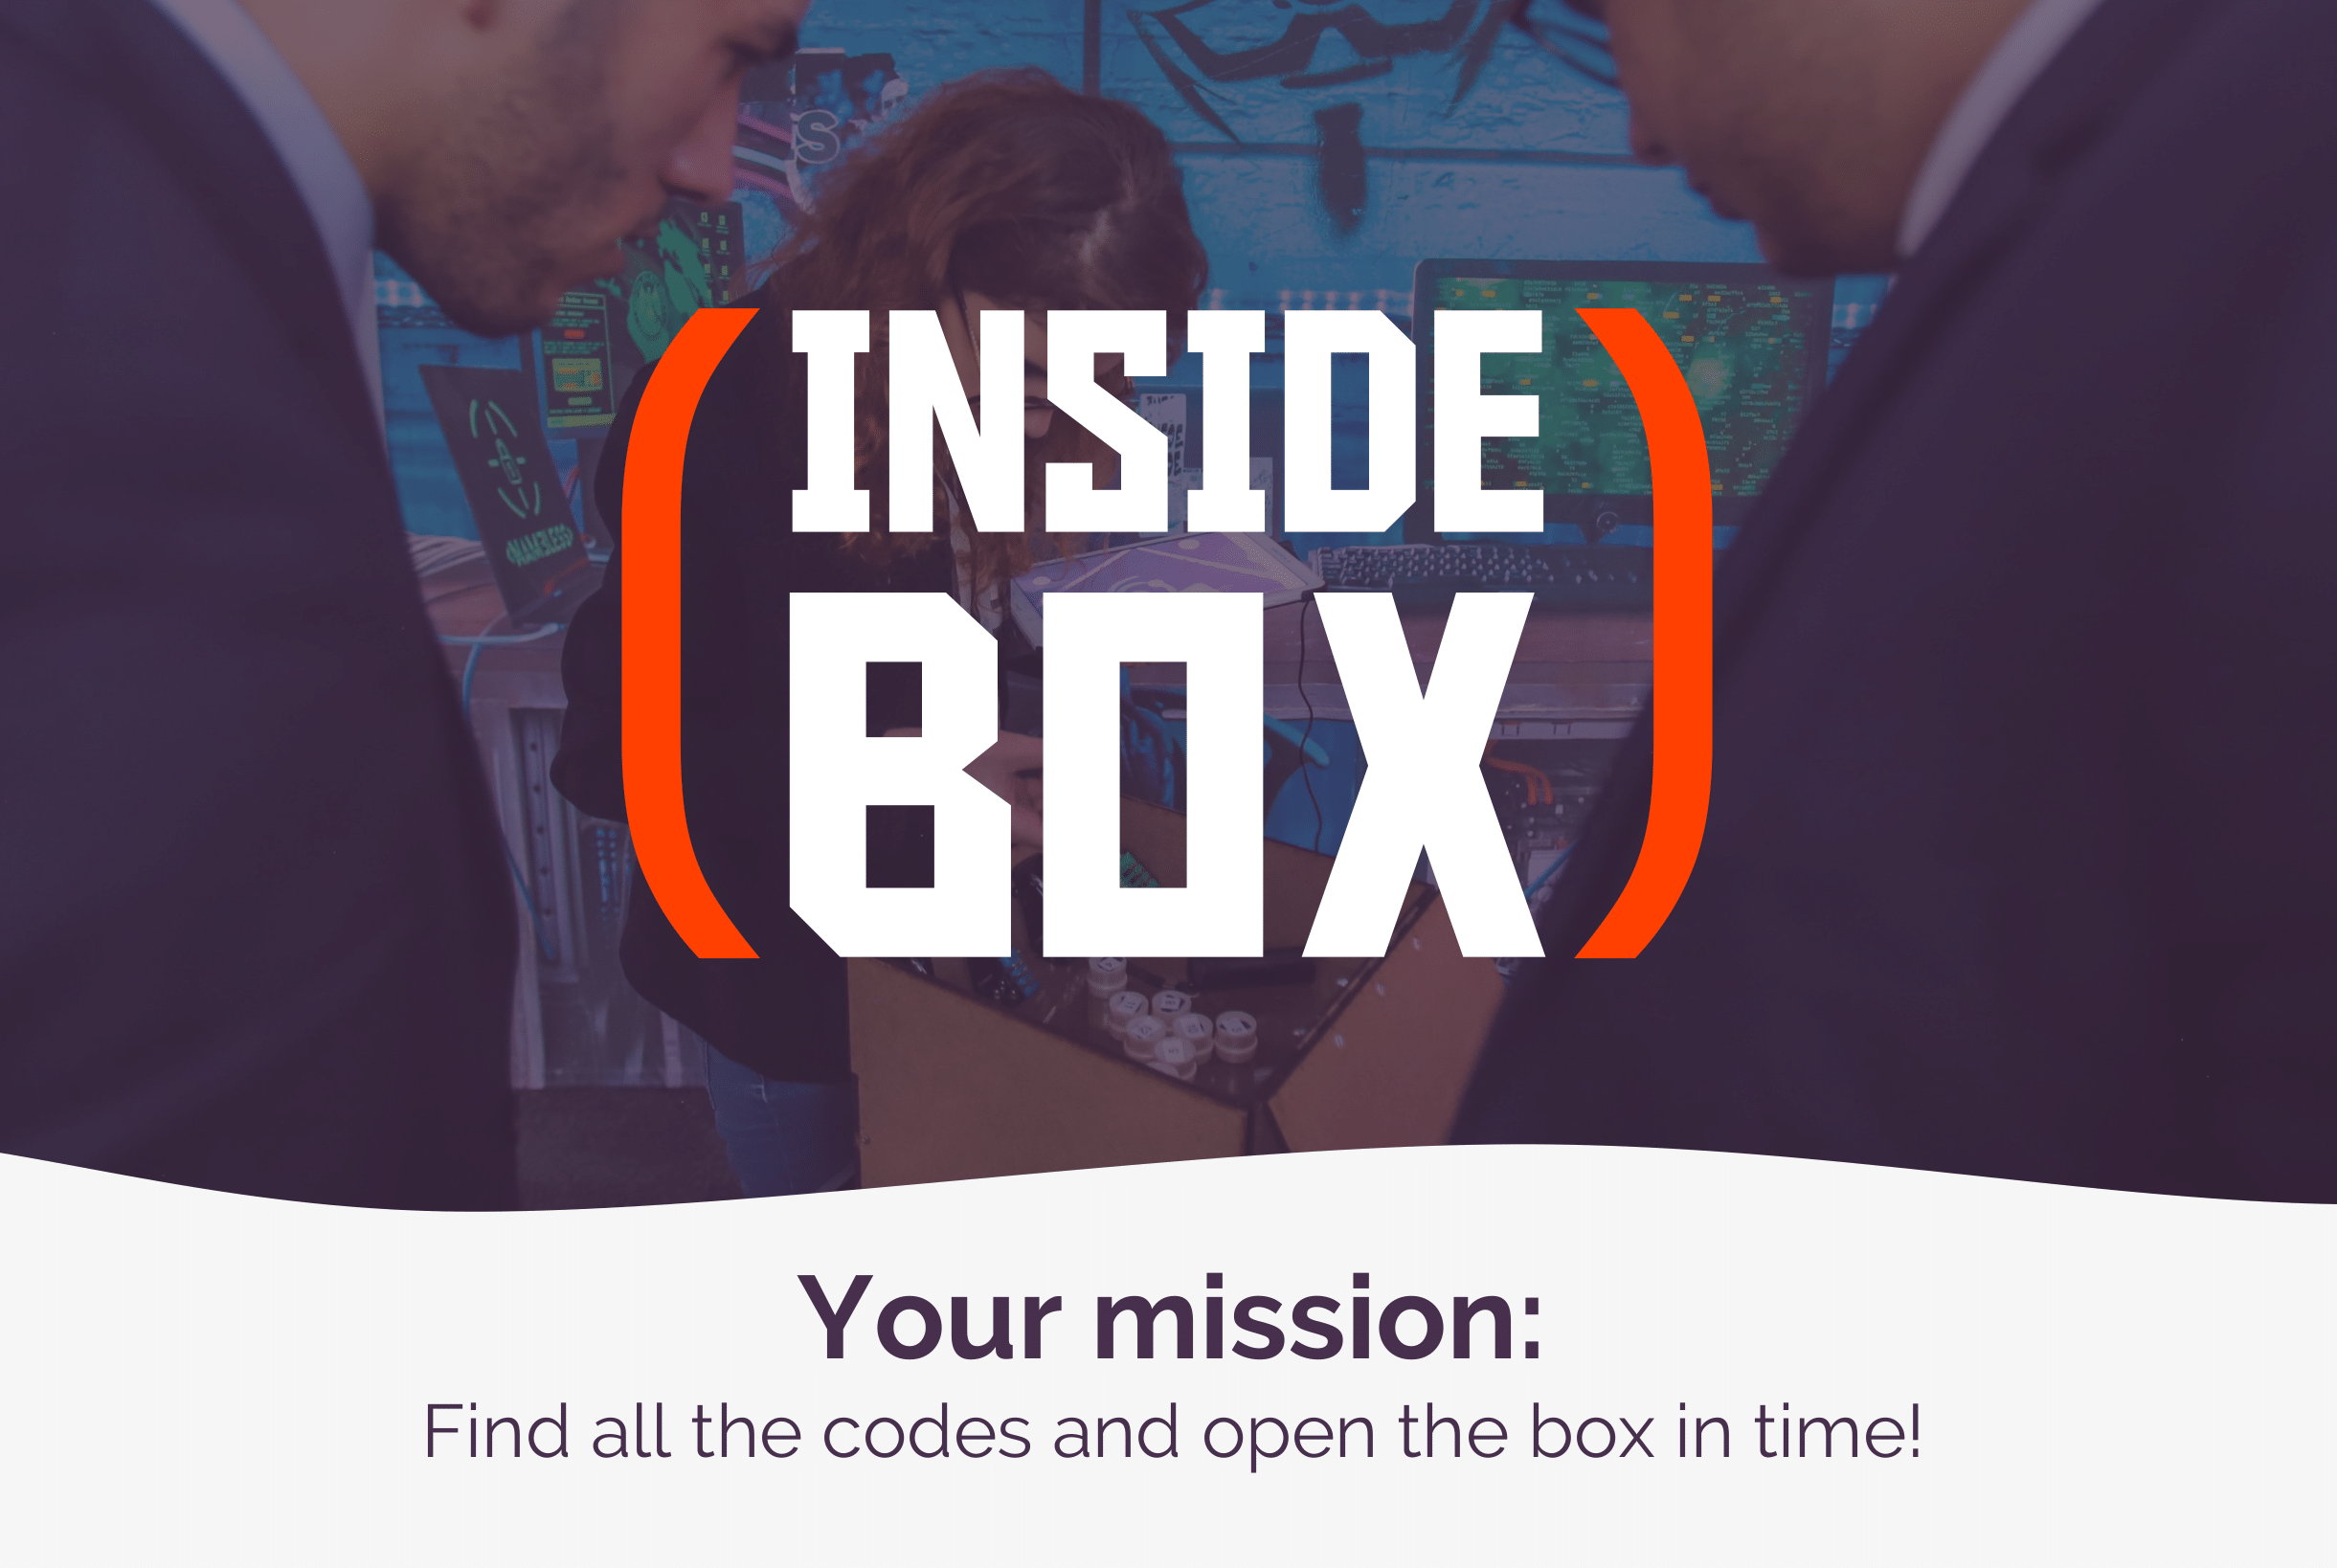 Inside box - Packaged escape game